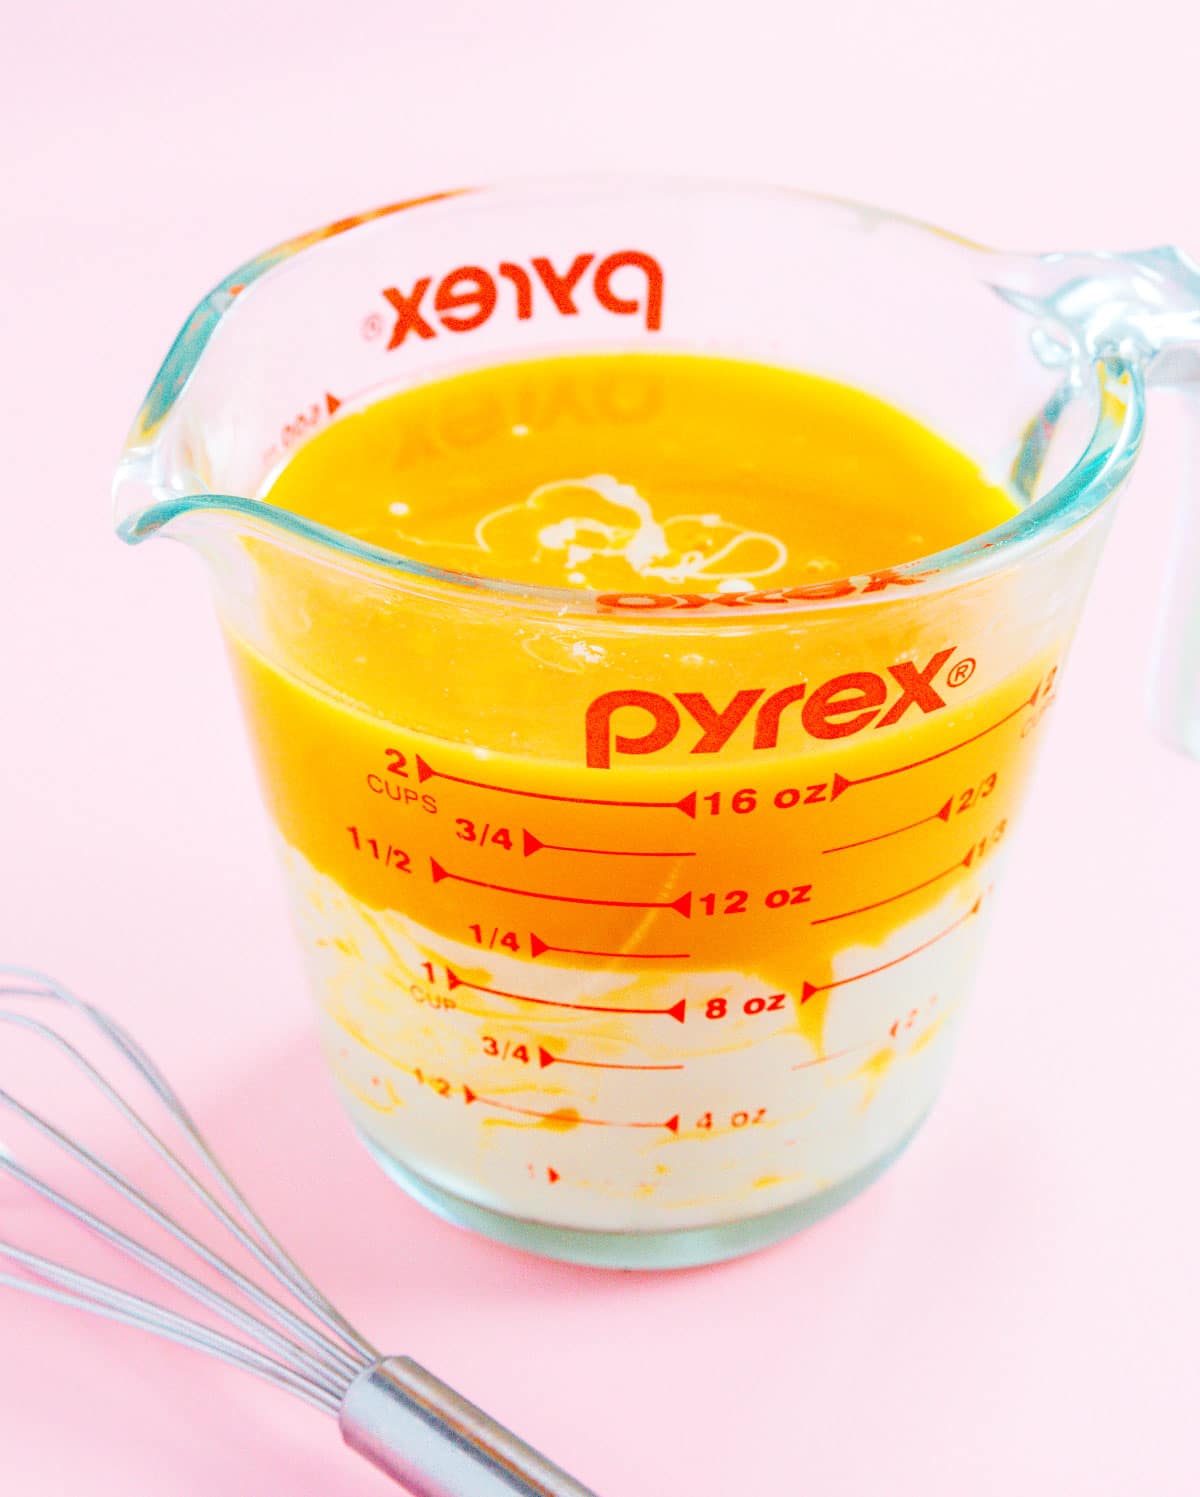 Passion fruit puree and condensed milk in a glass measuring cup.